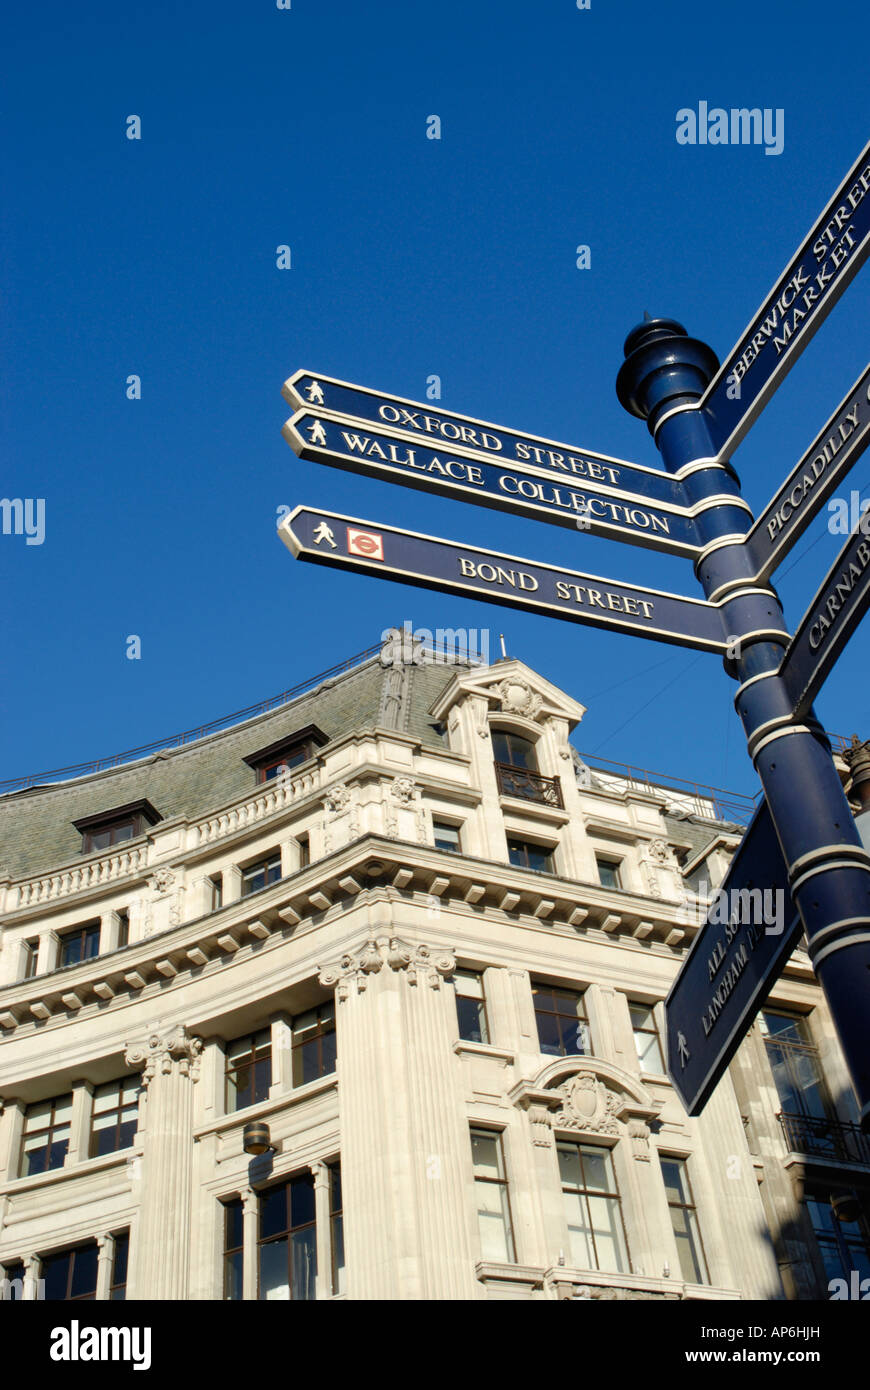 Pedestrian signposts and ornate Victorian Building at Oxford Circus London England 2007 Stock Photo